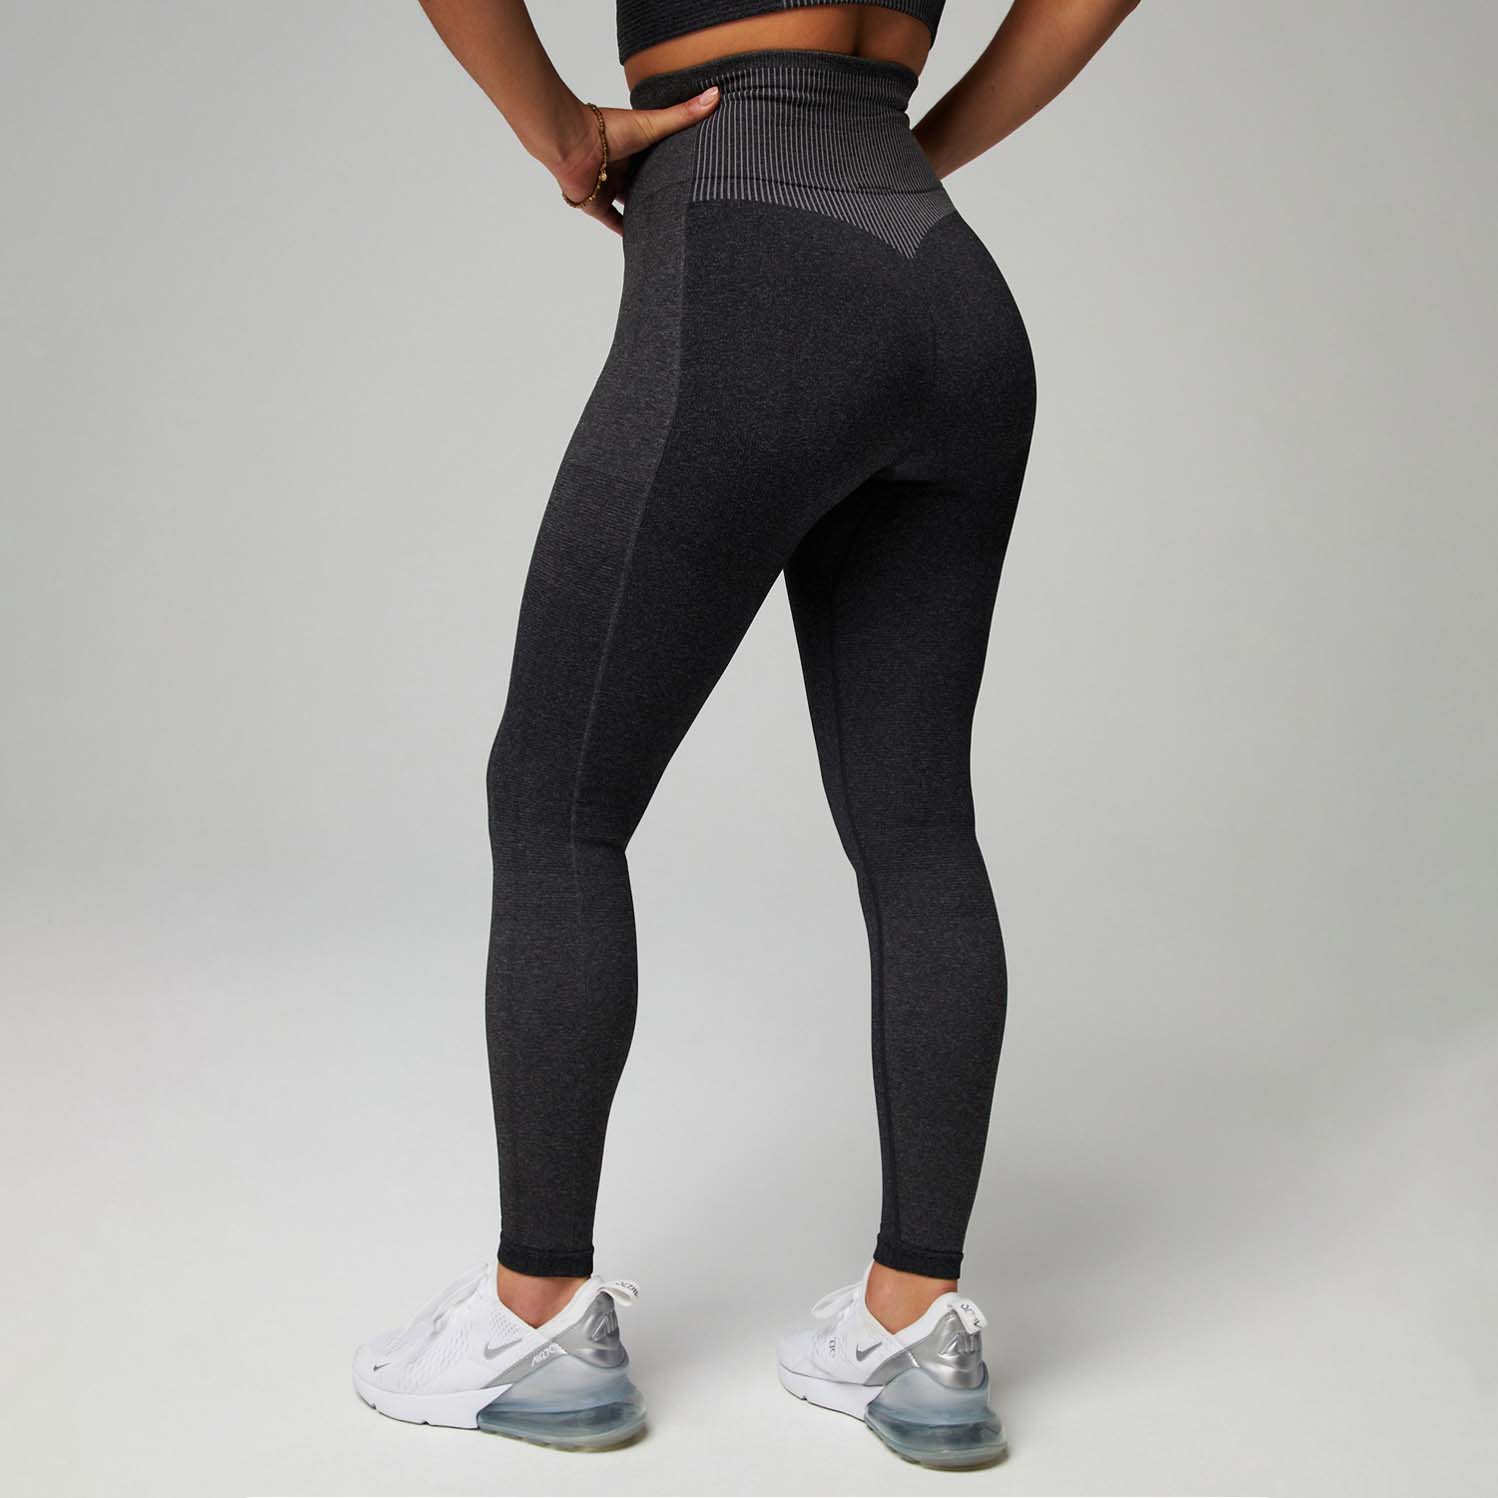 Fabletics Workout Leggings Review and Latest Promo Codes